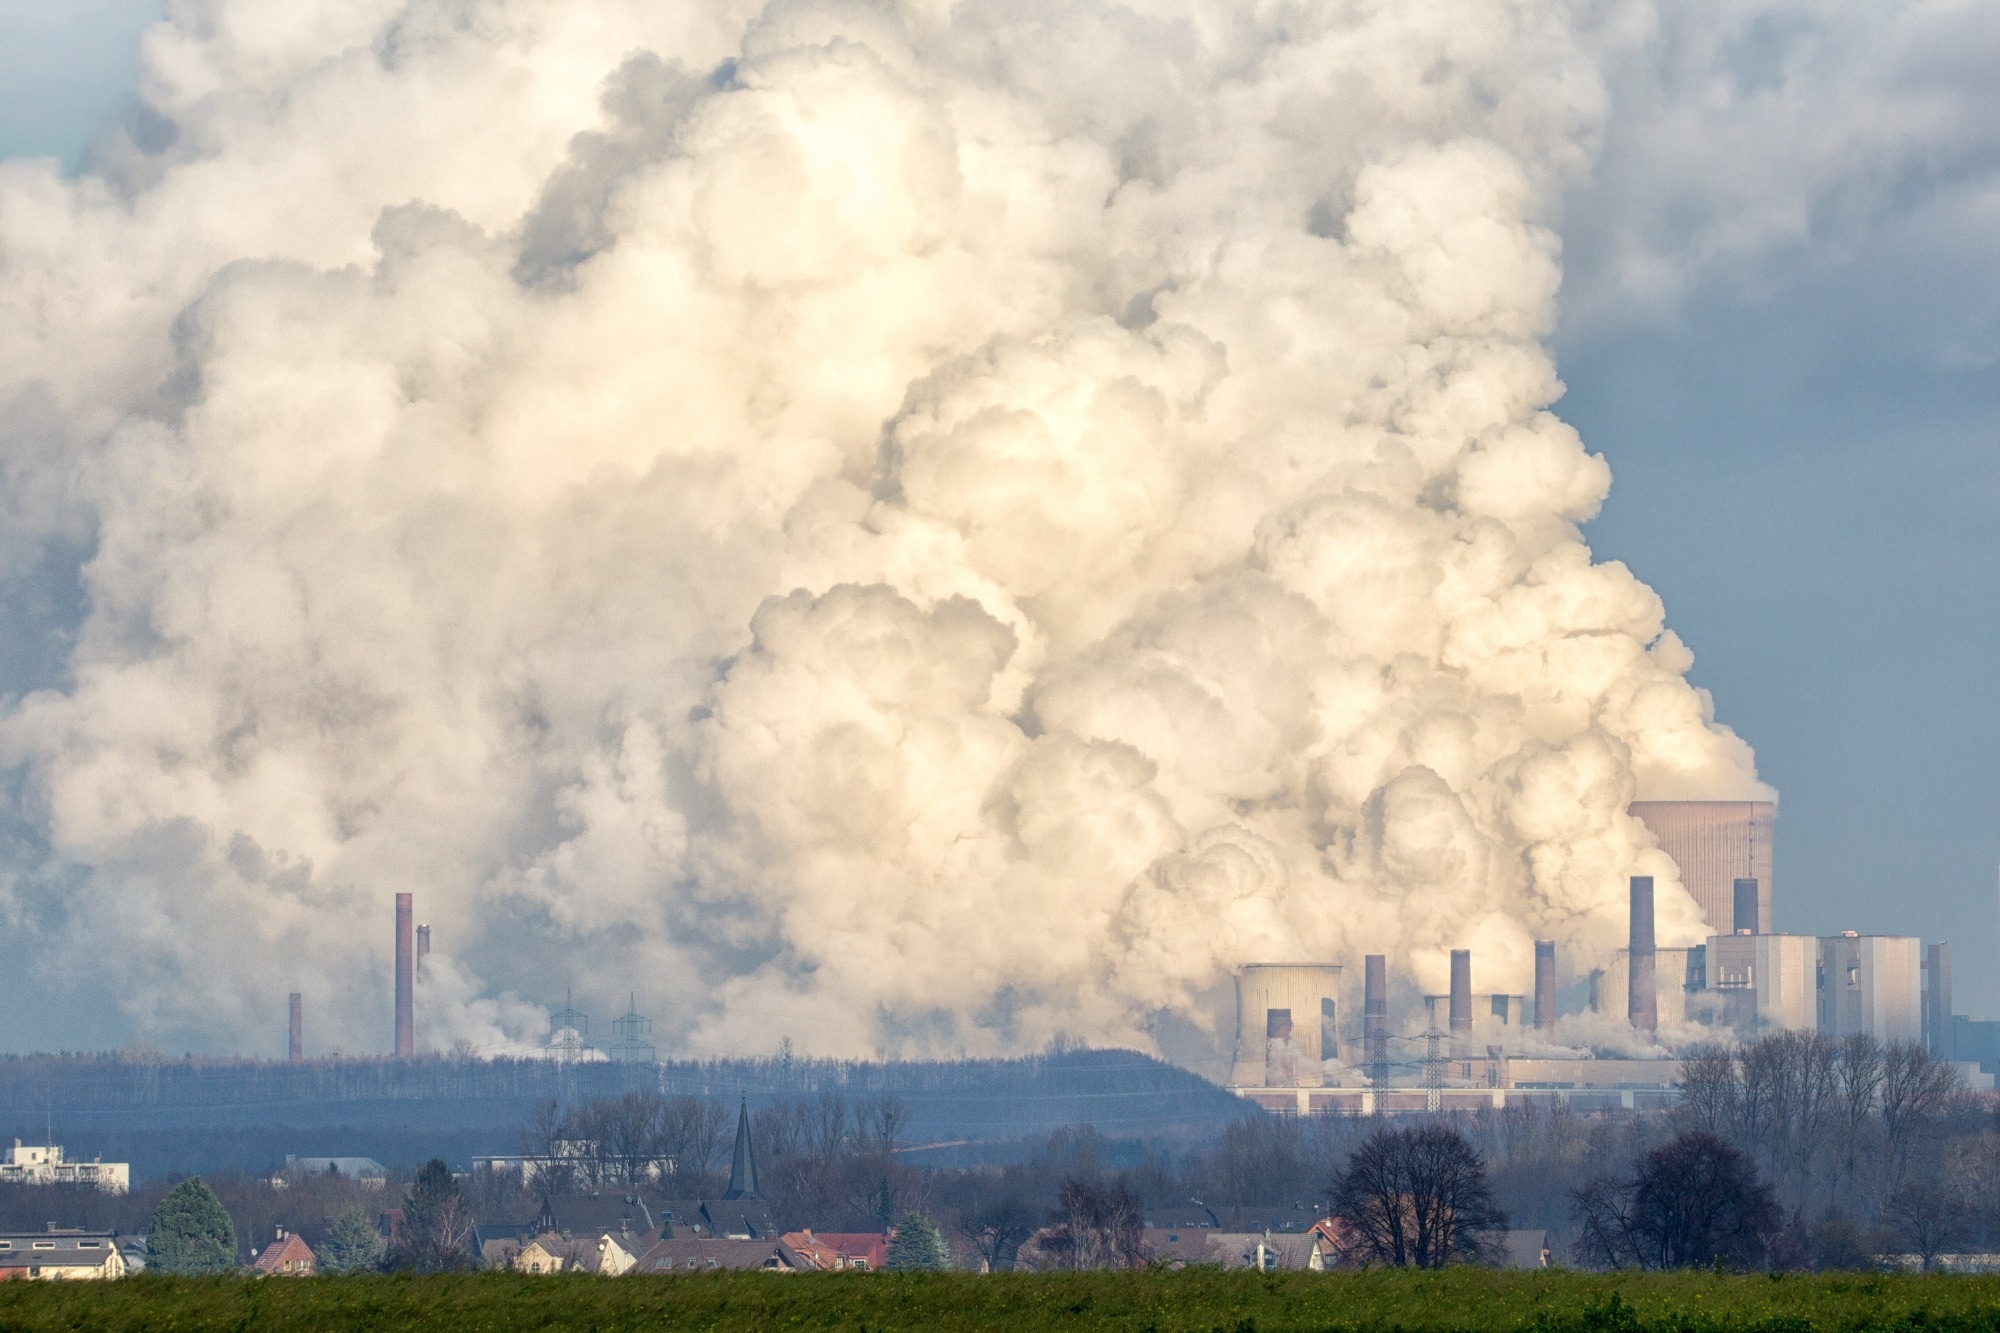 Study: Ambient fine particulate matter and breast cancer incidence in a large prospective US cohort. Image Credit: VanderWolf Images / Shutterstock